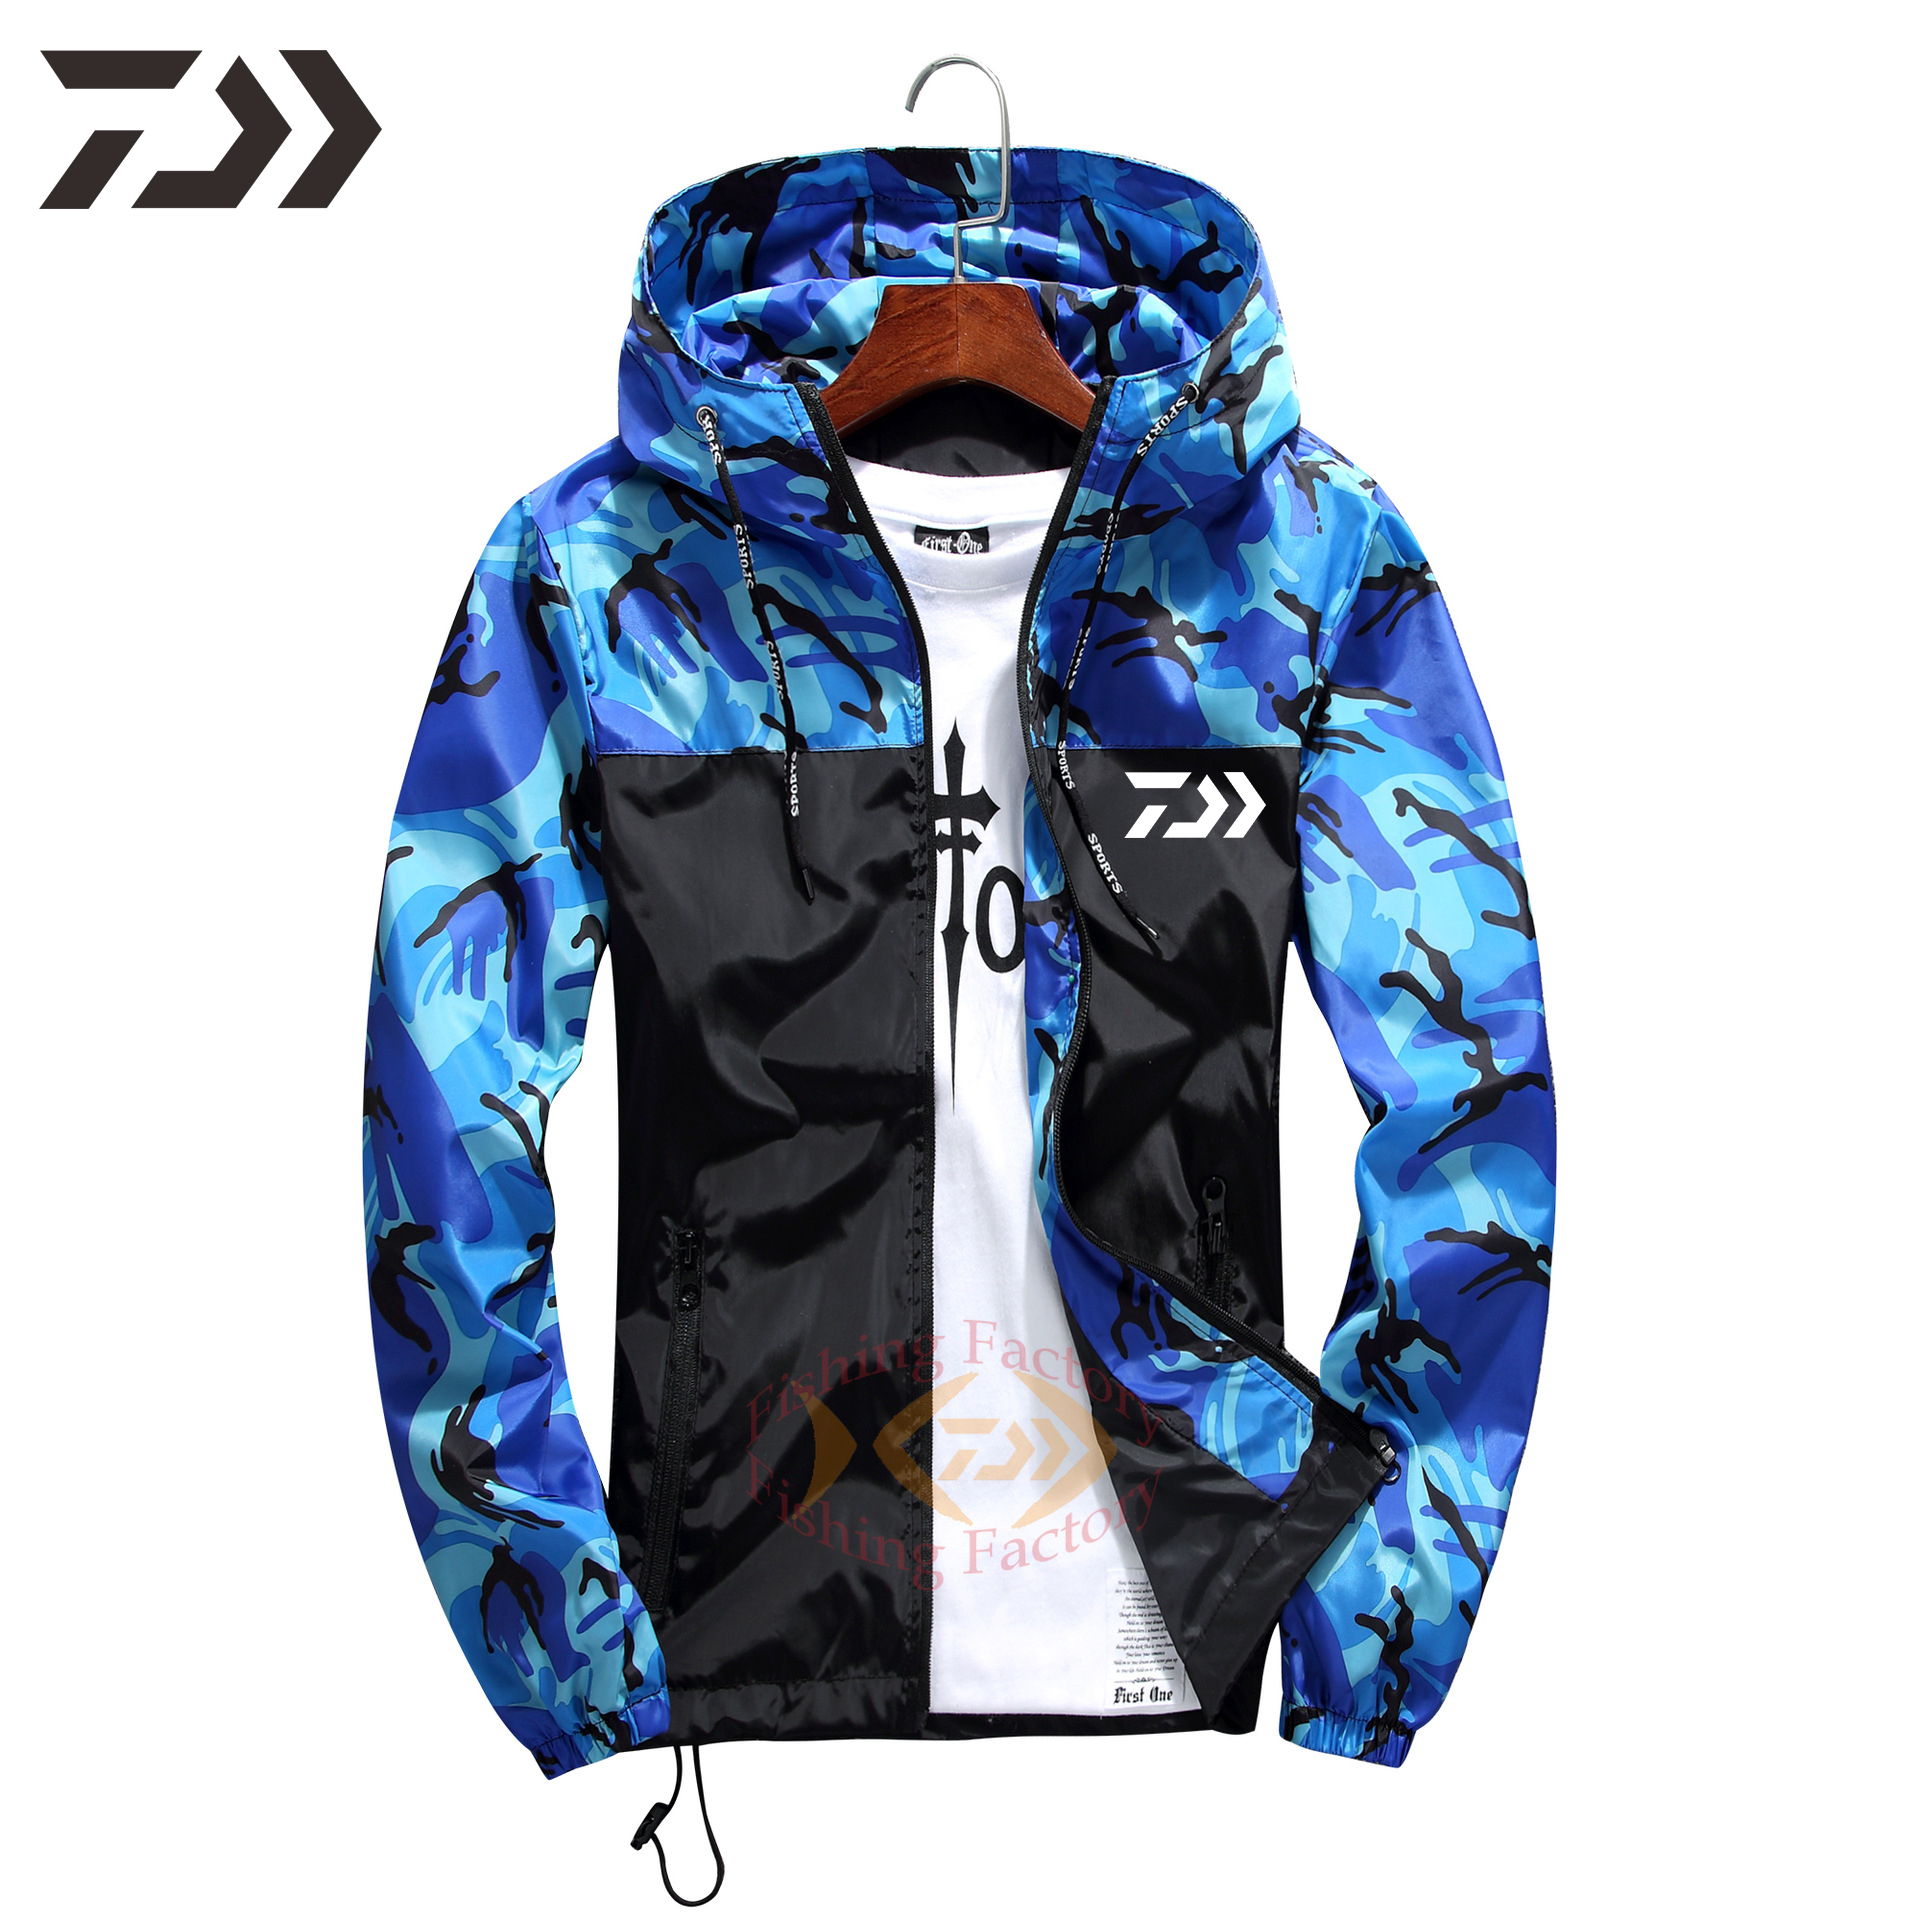 Daiwa Fishing Shirts Ultrathin Hooded Casual Outdoor Sport Wear Quick Dry Fishing Jackets Camouflage Sport Fishing Clothes